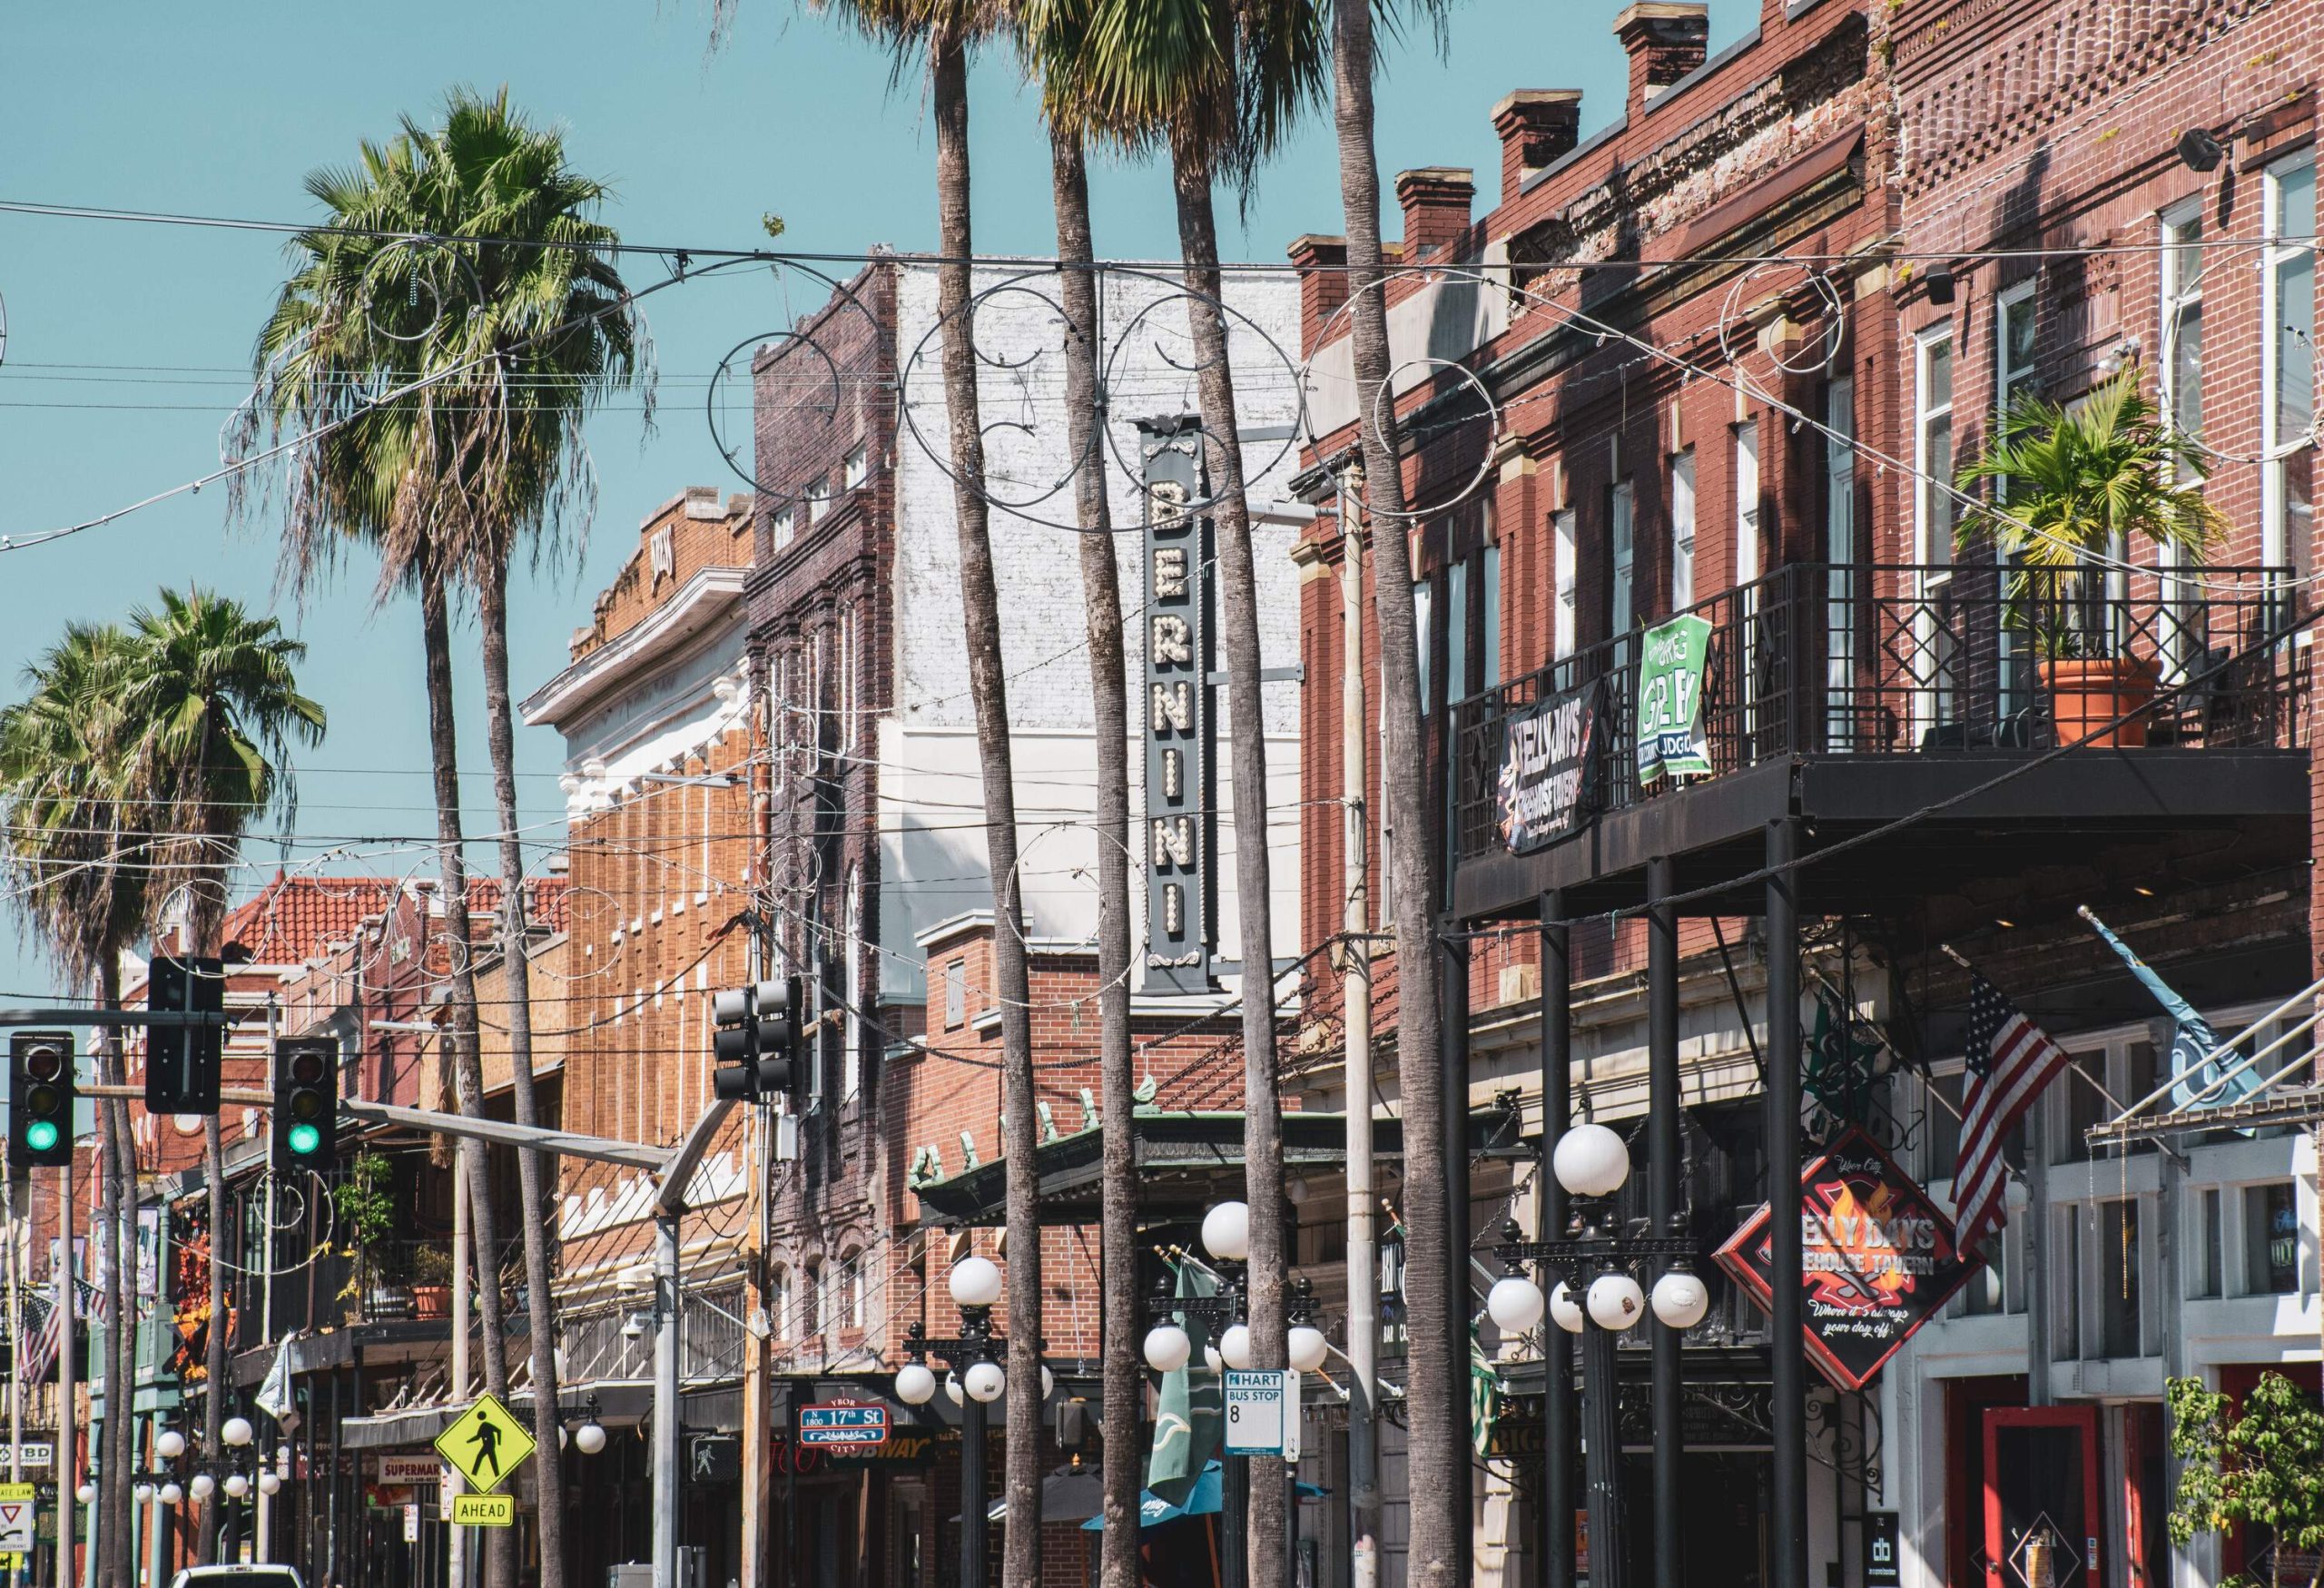 A row of old brick buildings alongside the traffic lights and tall palm trees in a historic neighborhood.